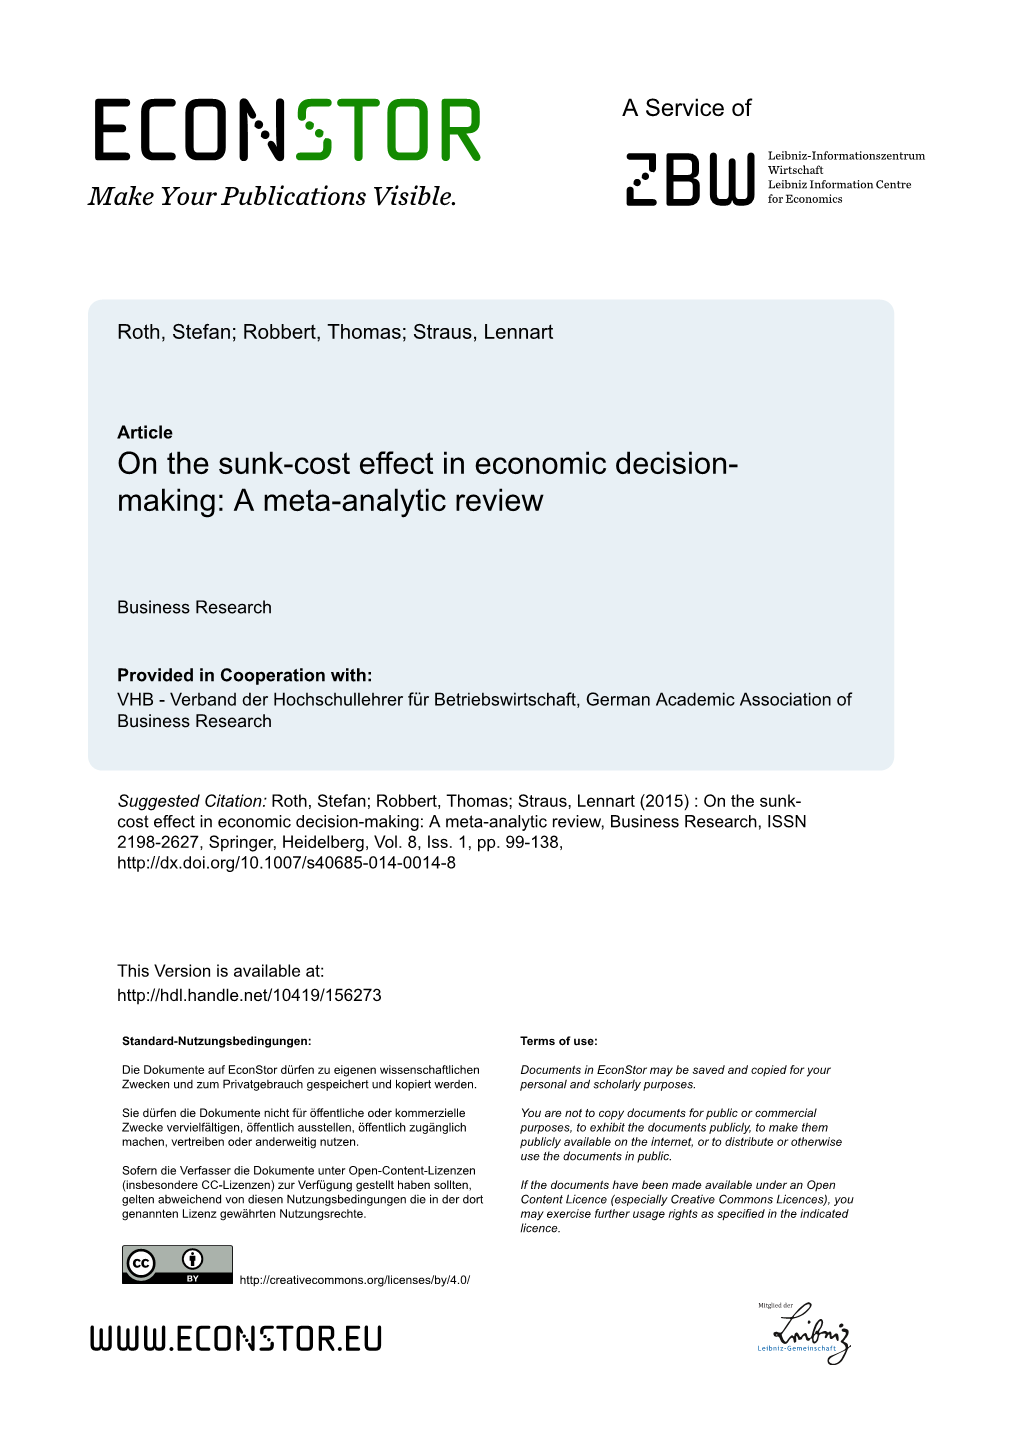 On the Sunk-Cost Effect in Economic Decision-Making: a Meta-Analytic Review